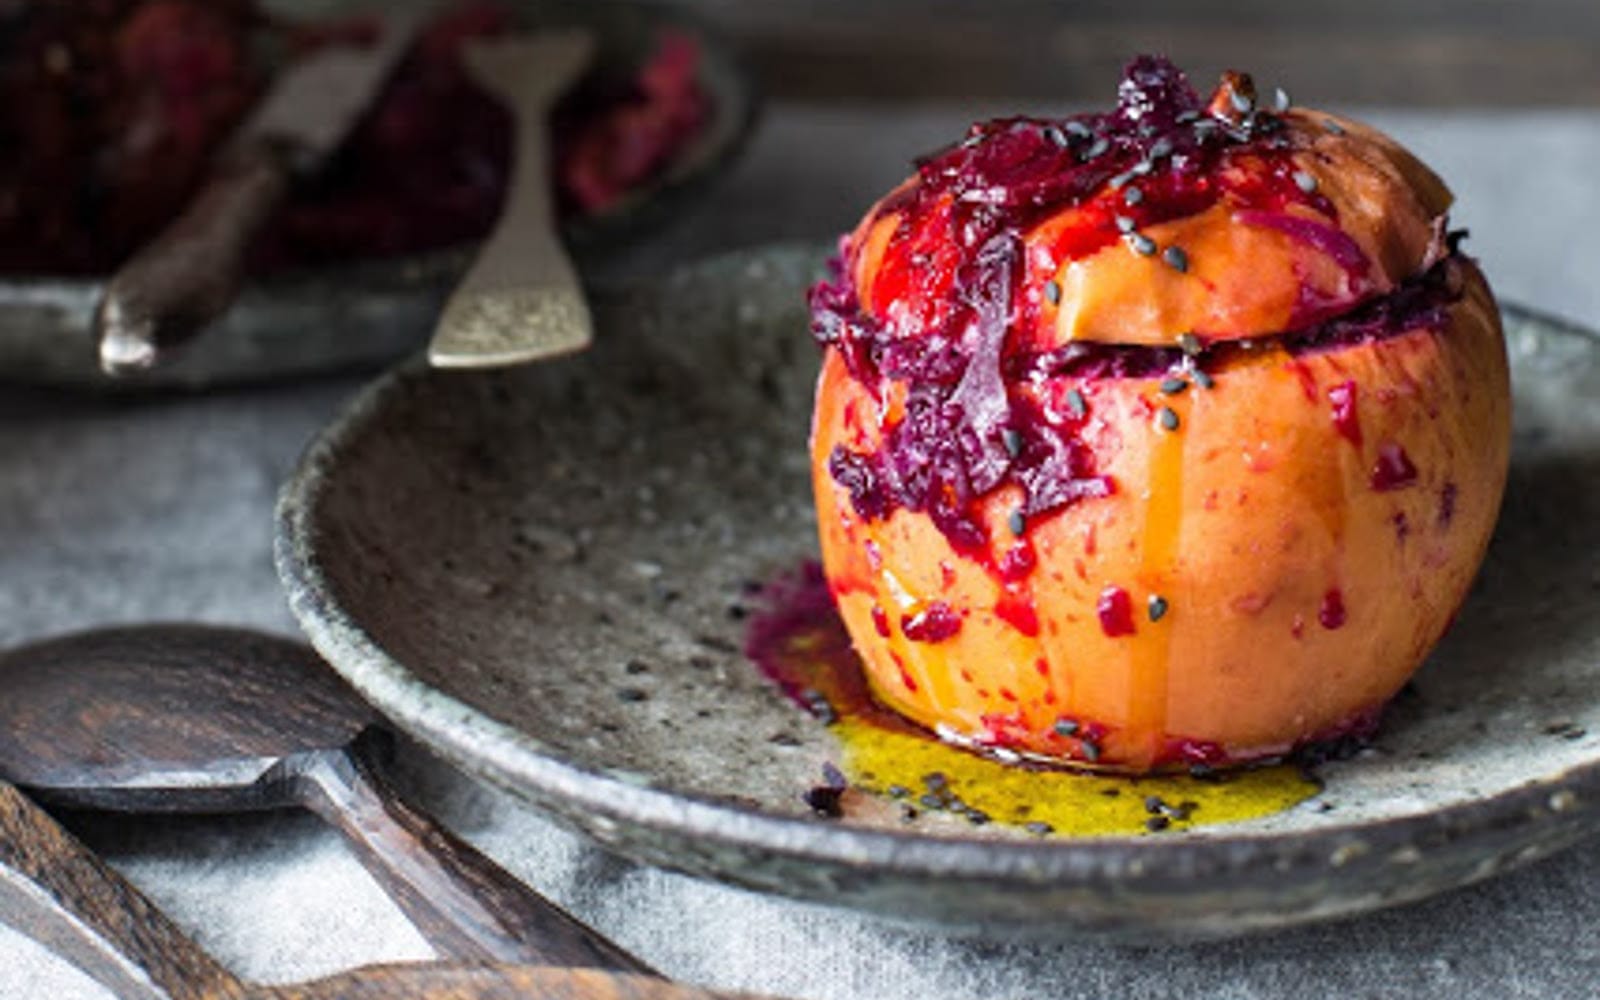 Apples Stuffed With Red Cabbage and Cranberries